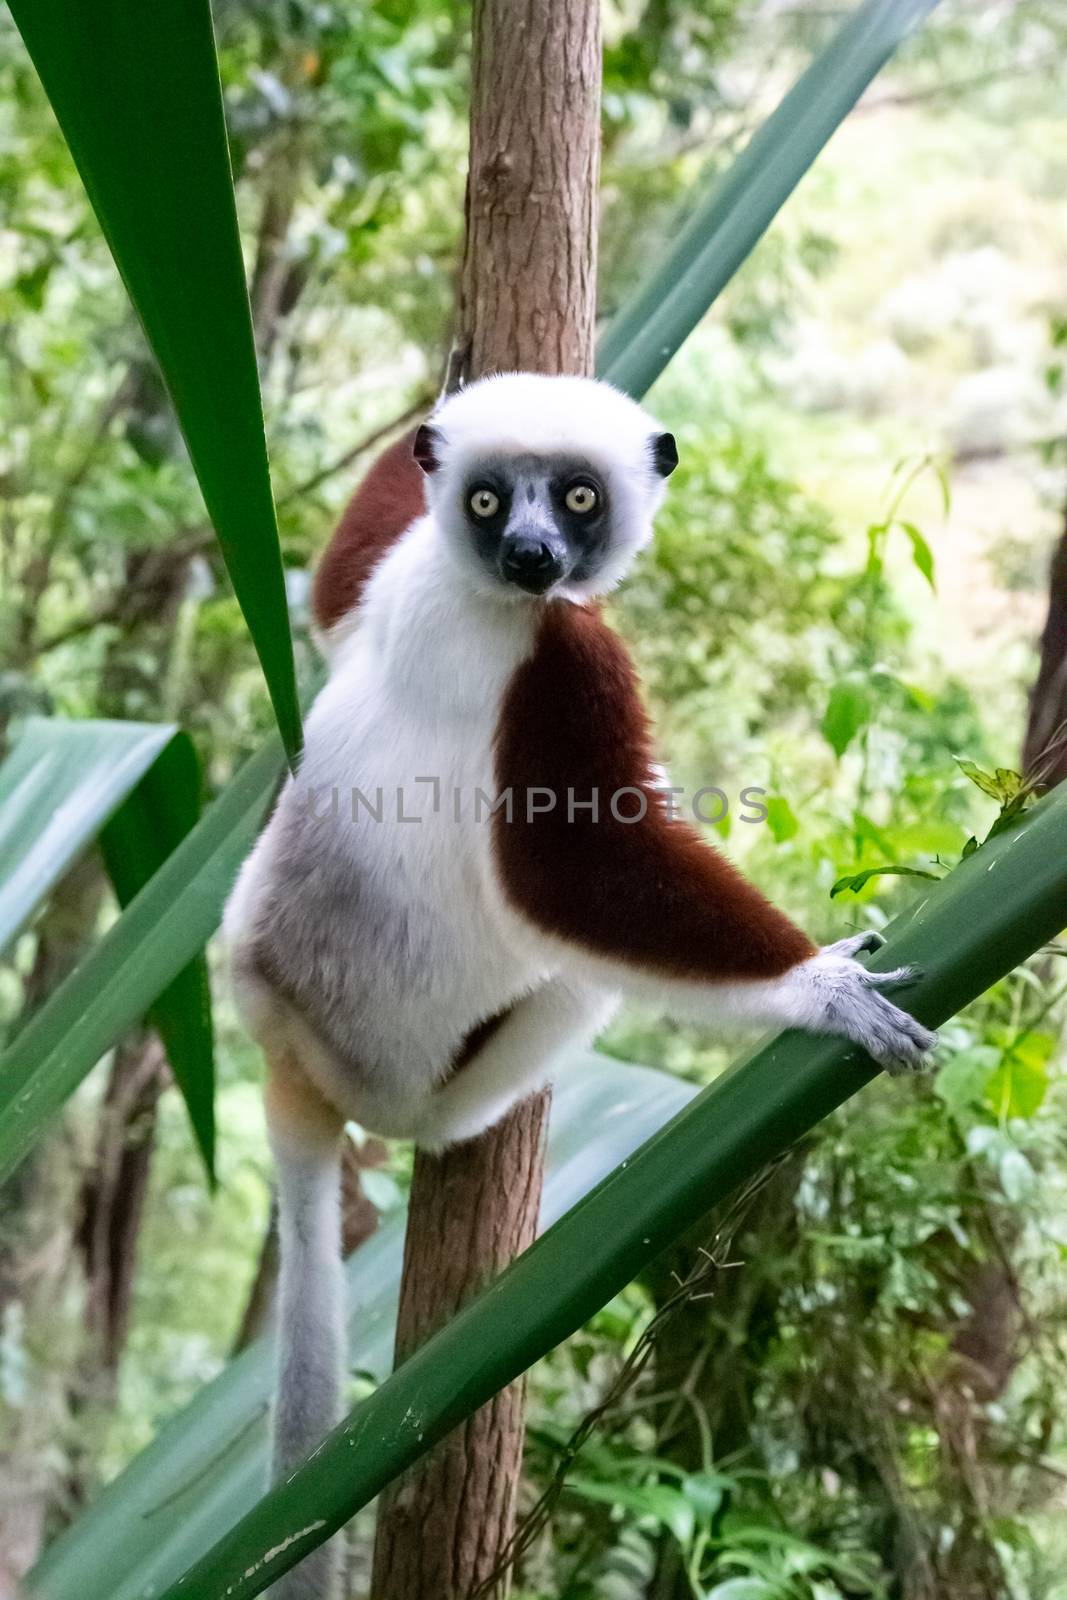 One portrait of a Sifaka lemur in the rainforest